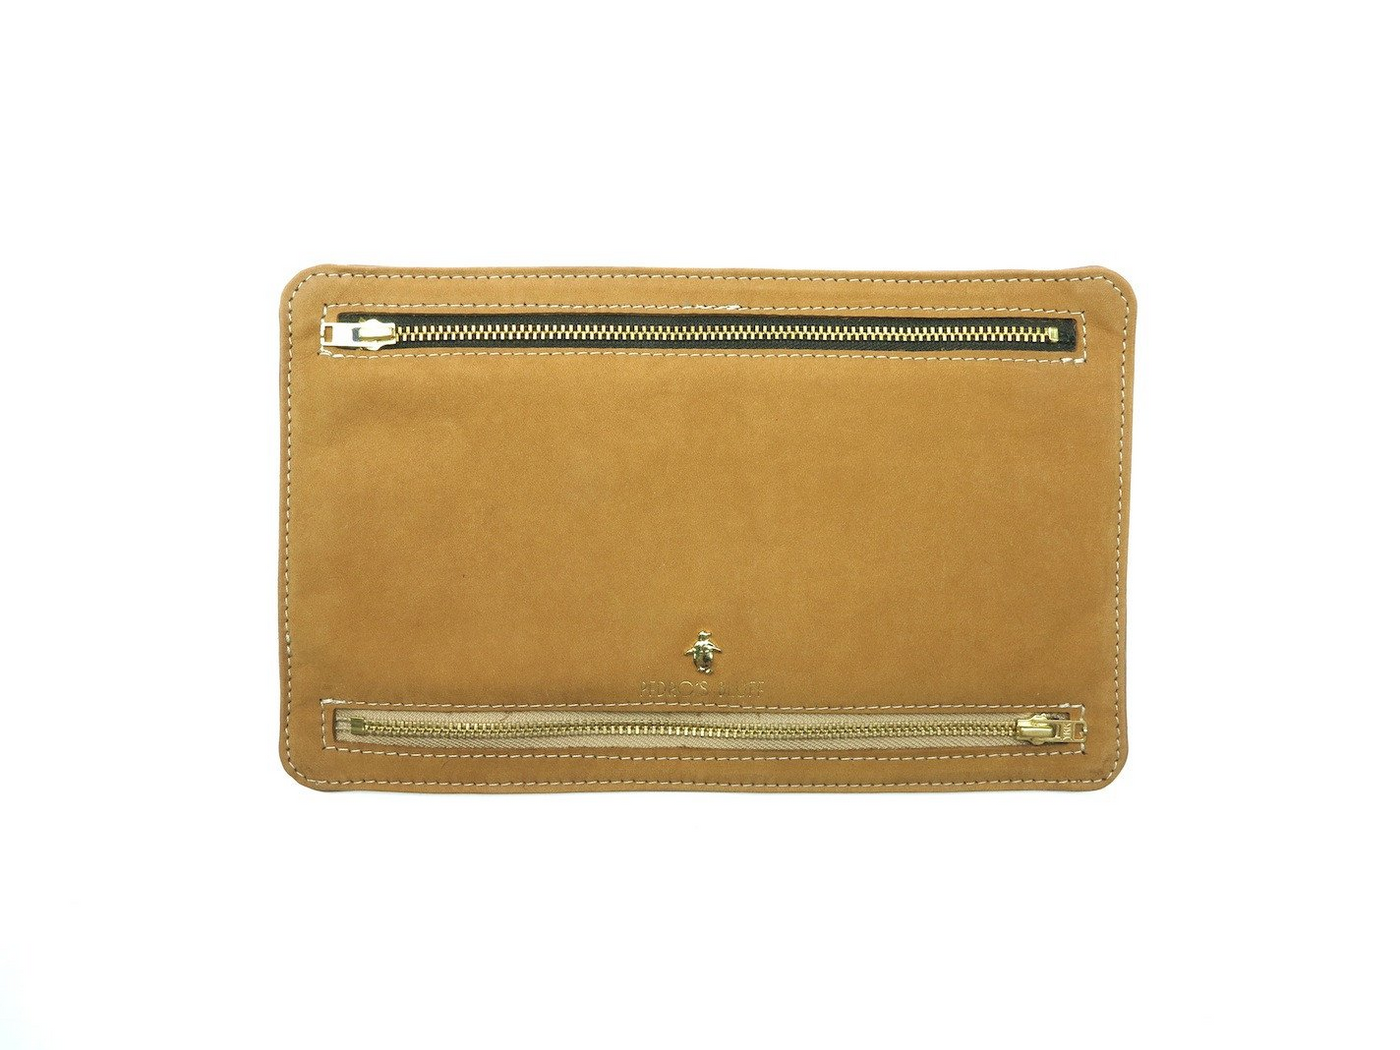 Globehopper Wallet - Shearling - PEDRO'S BLUFF - New Zealand Leather Bags & Accessories